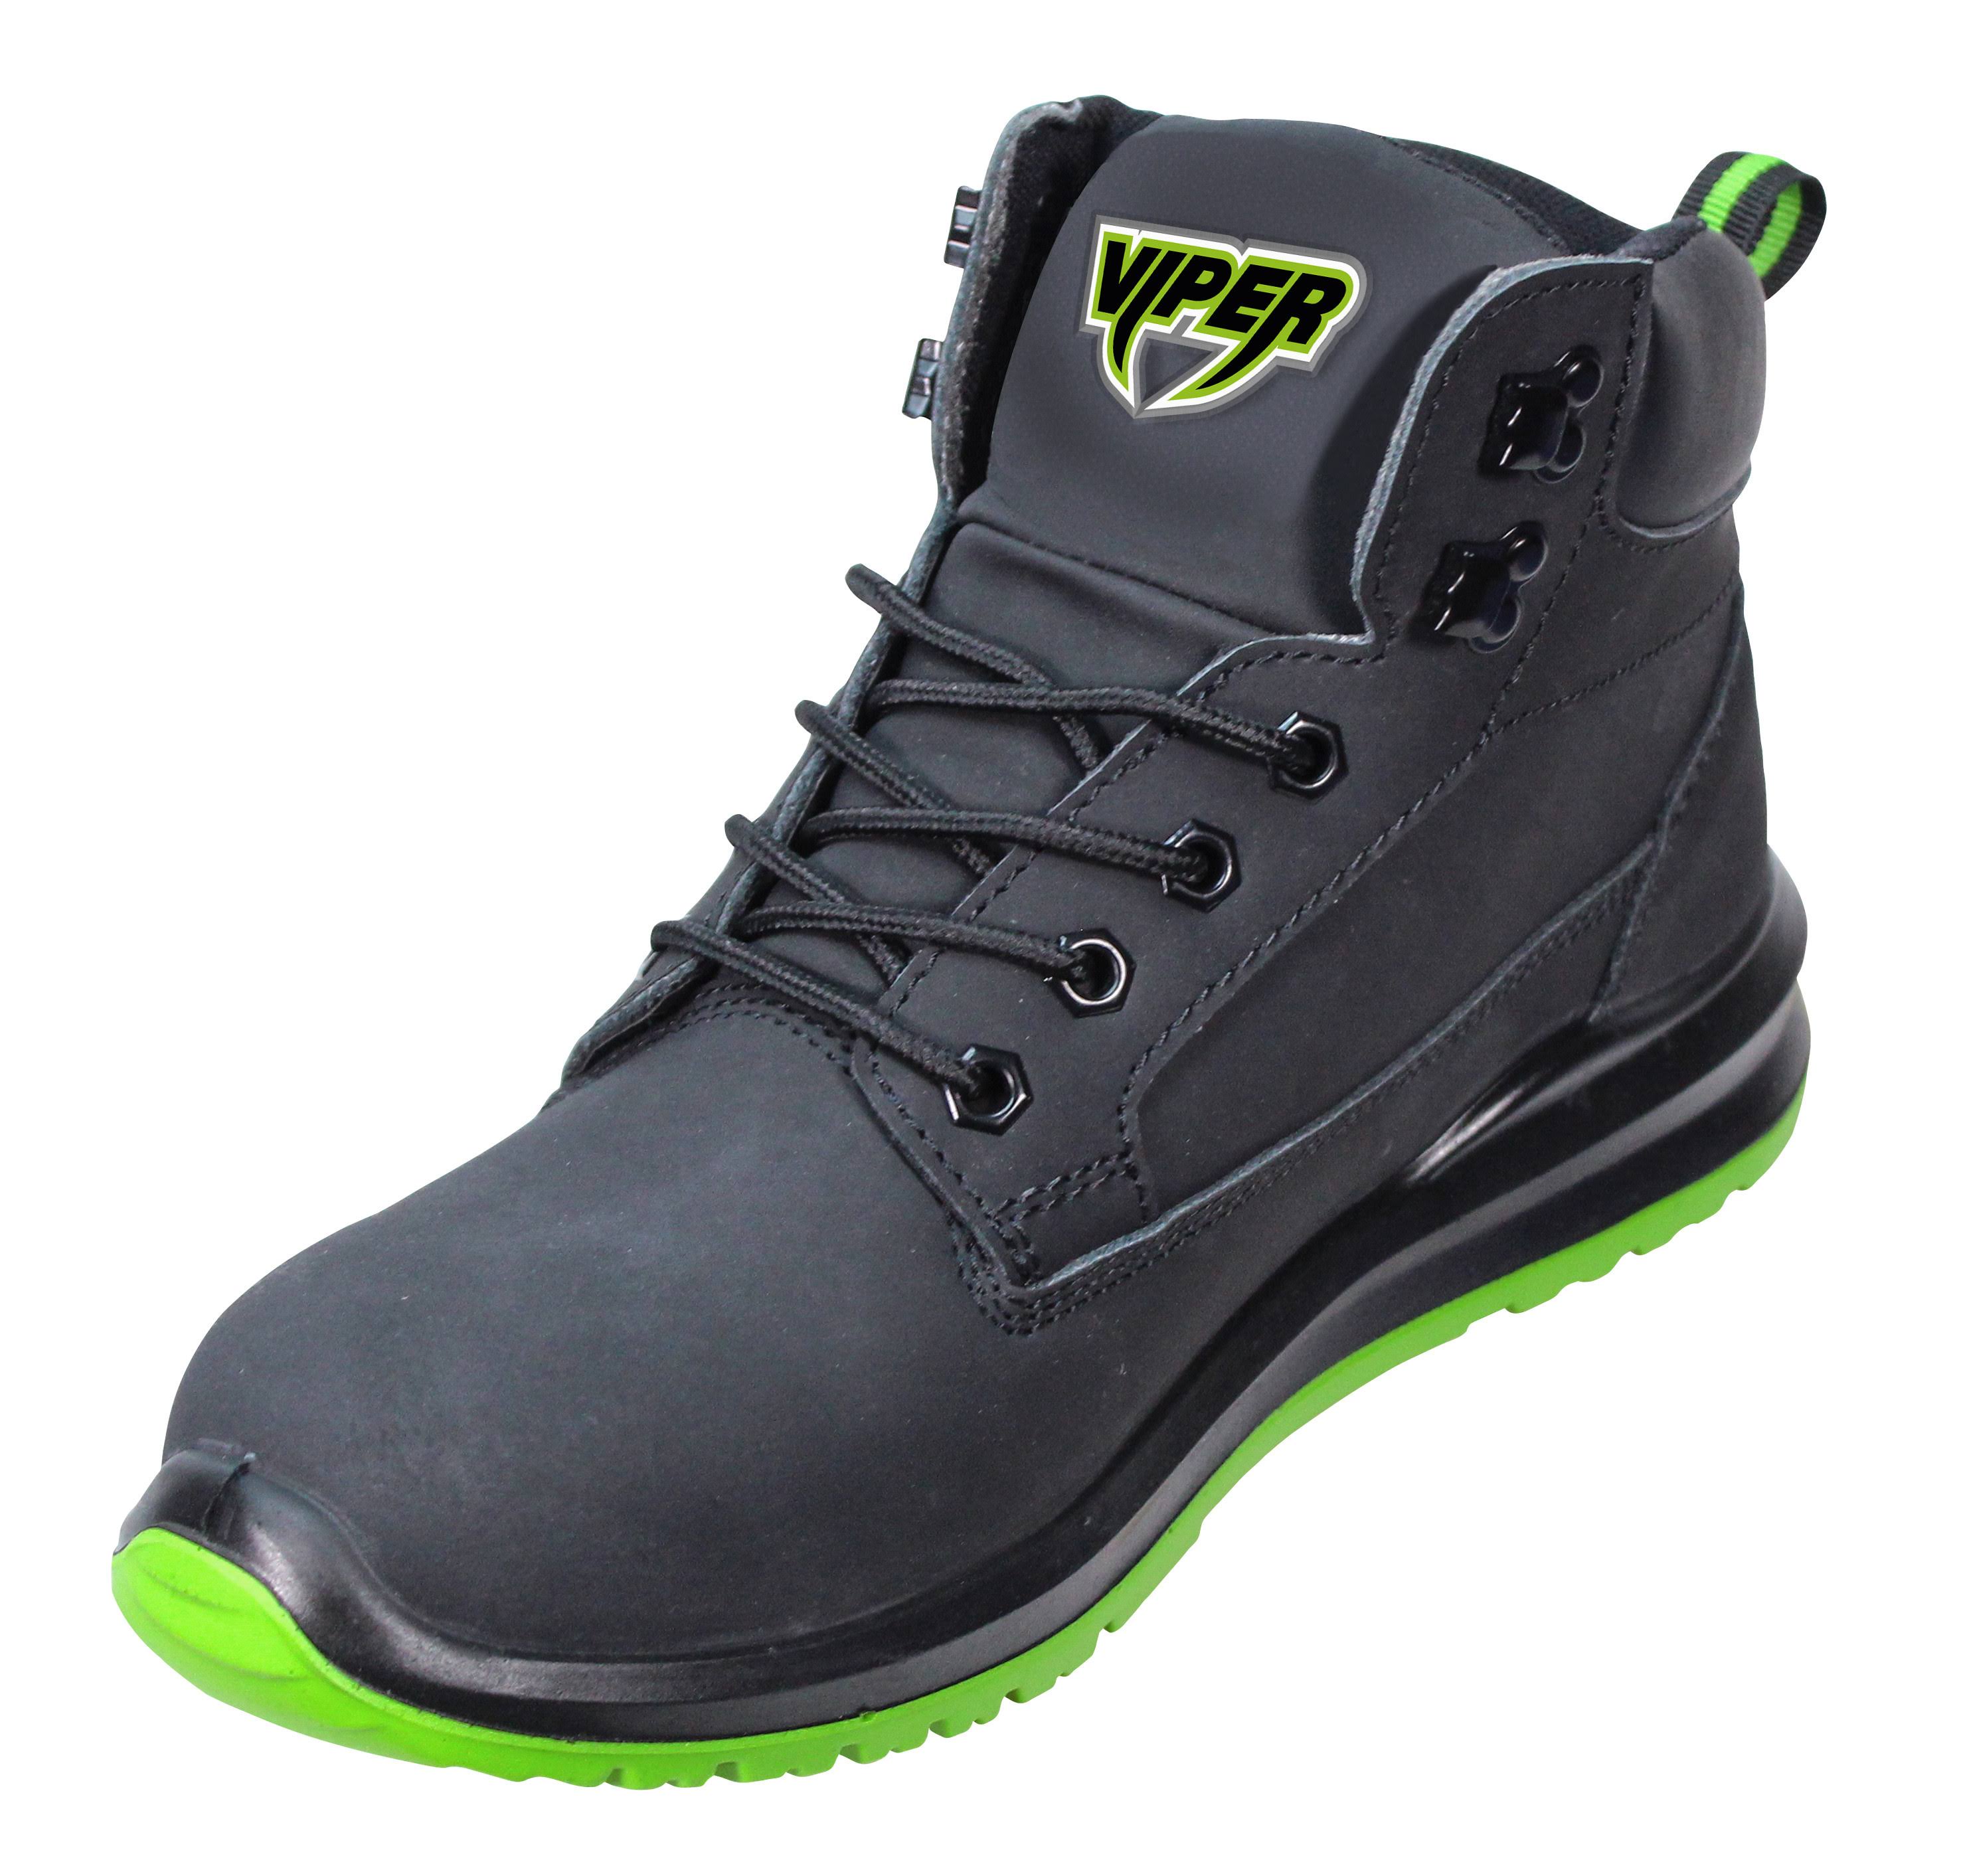 Scan Viper SBP Safety Boots 10